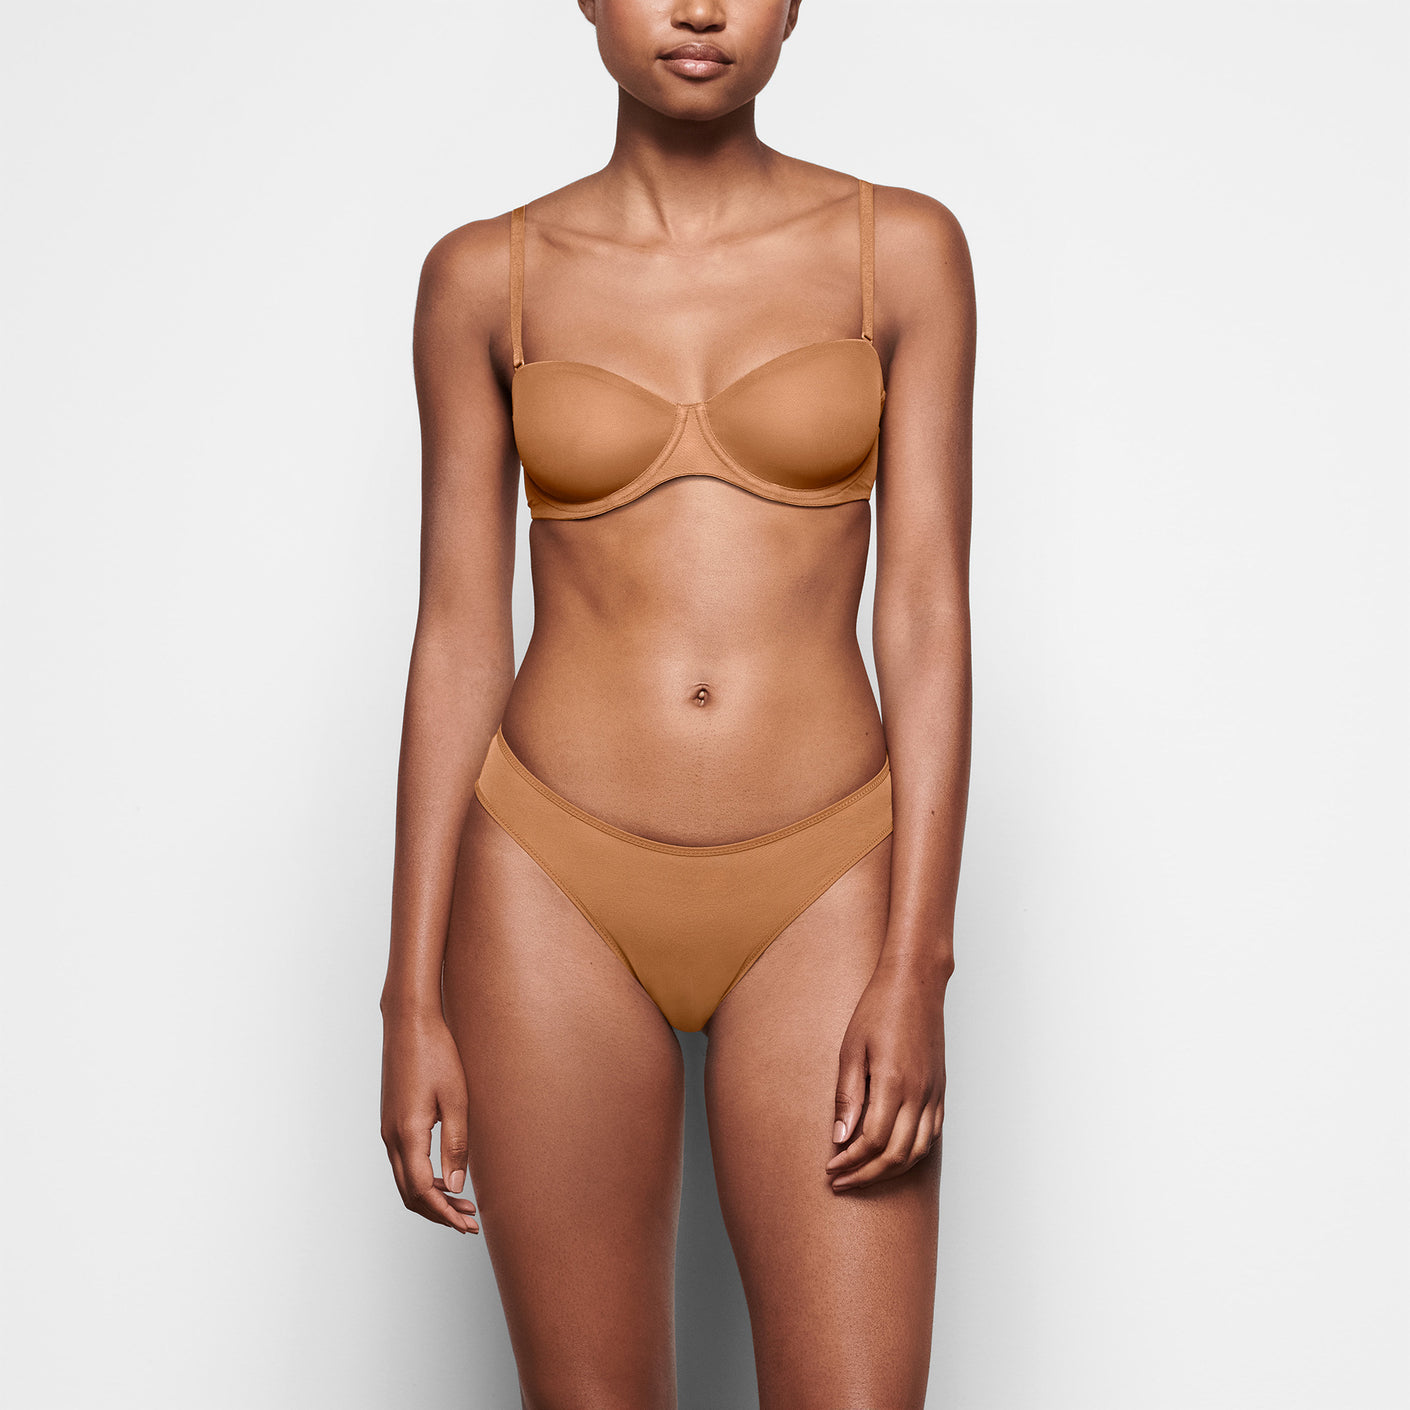 SKIMS Strapless Bra NWT 34C Tan Size 34 C - $30 (42% Off Retail) New With  Tags - From Ali